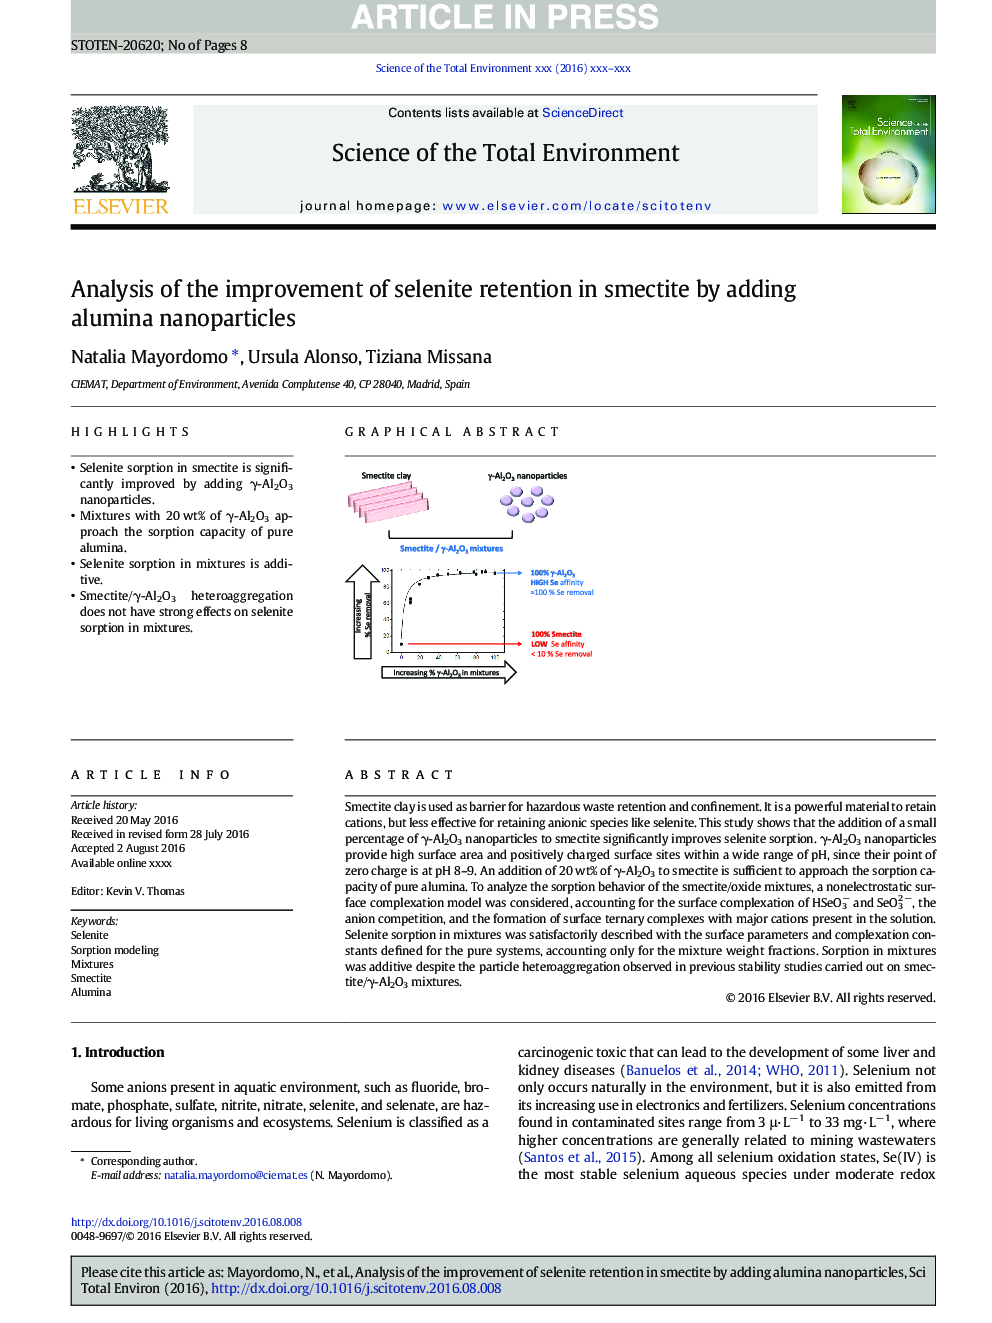 Analysis of the improvement of selenite retention in smectite by adding alumina nanoparticles